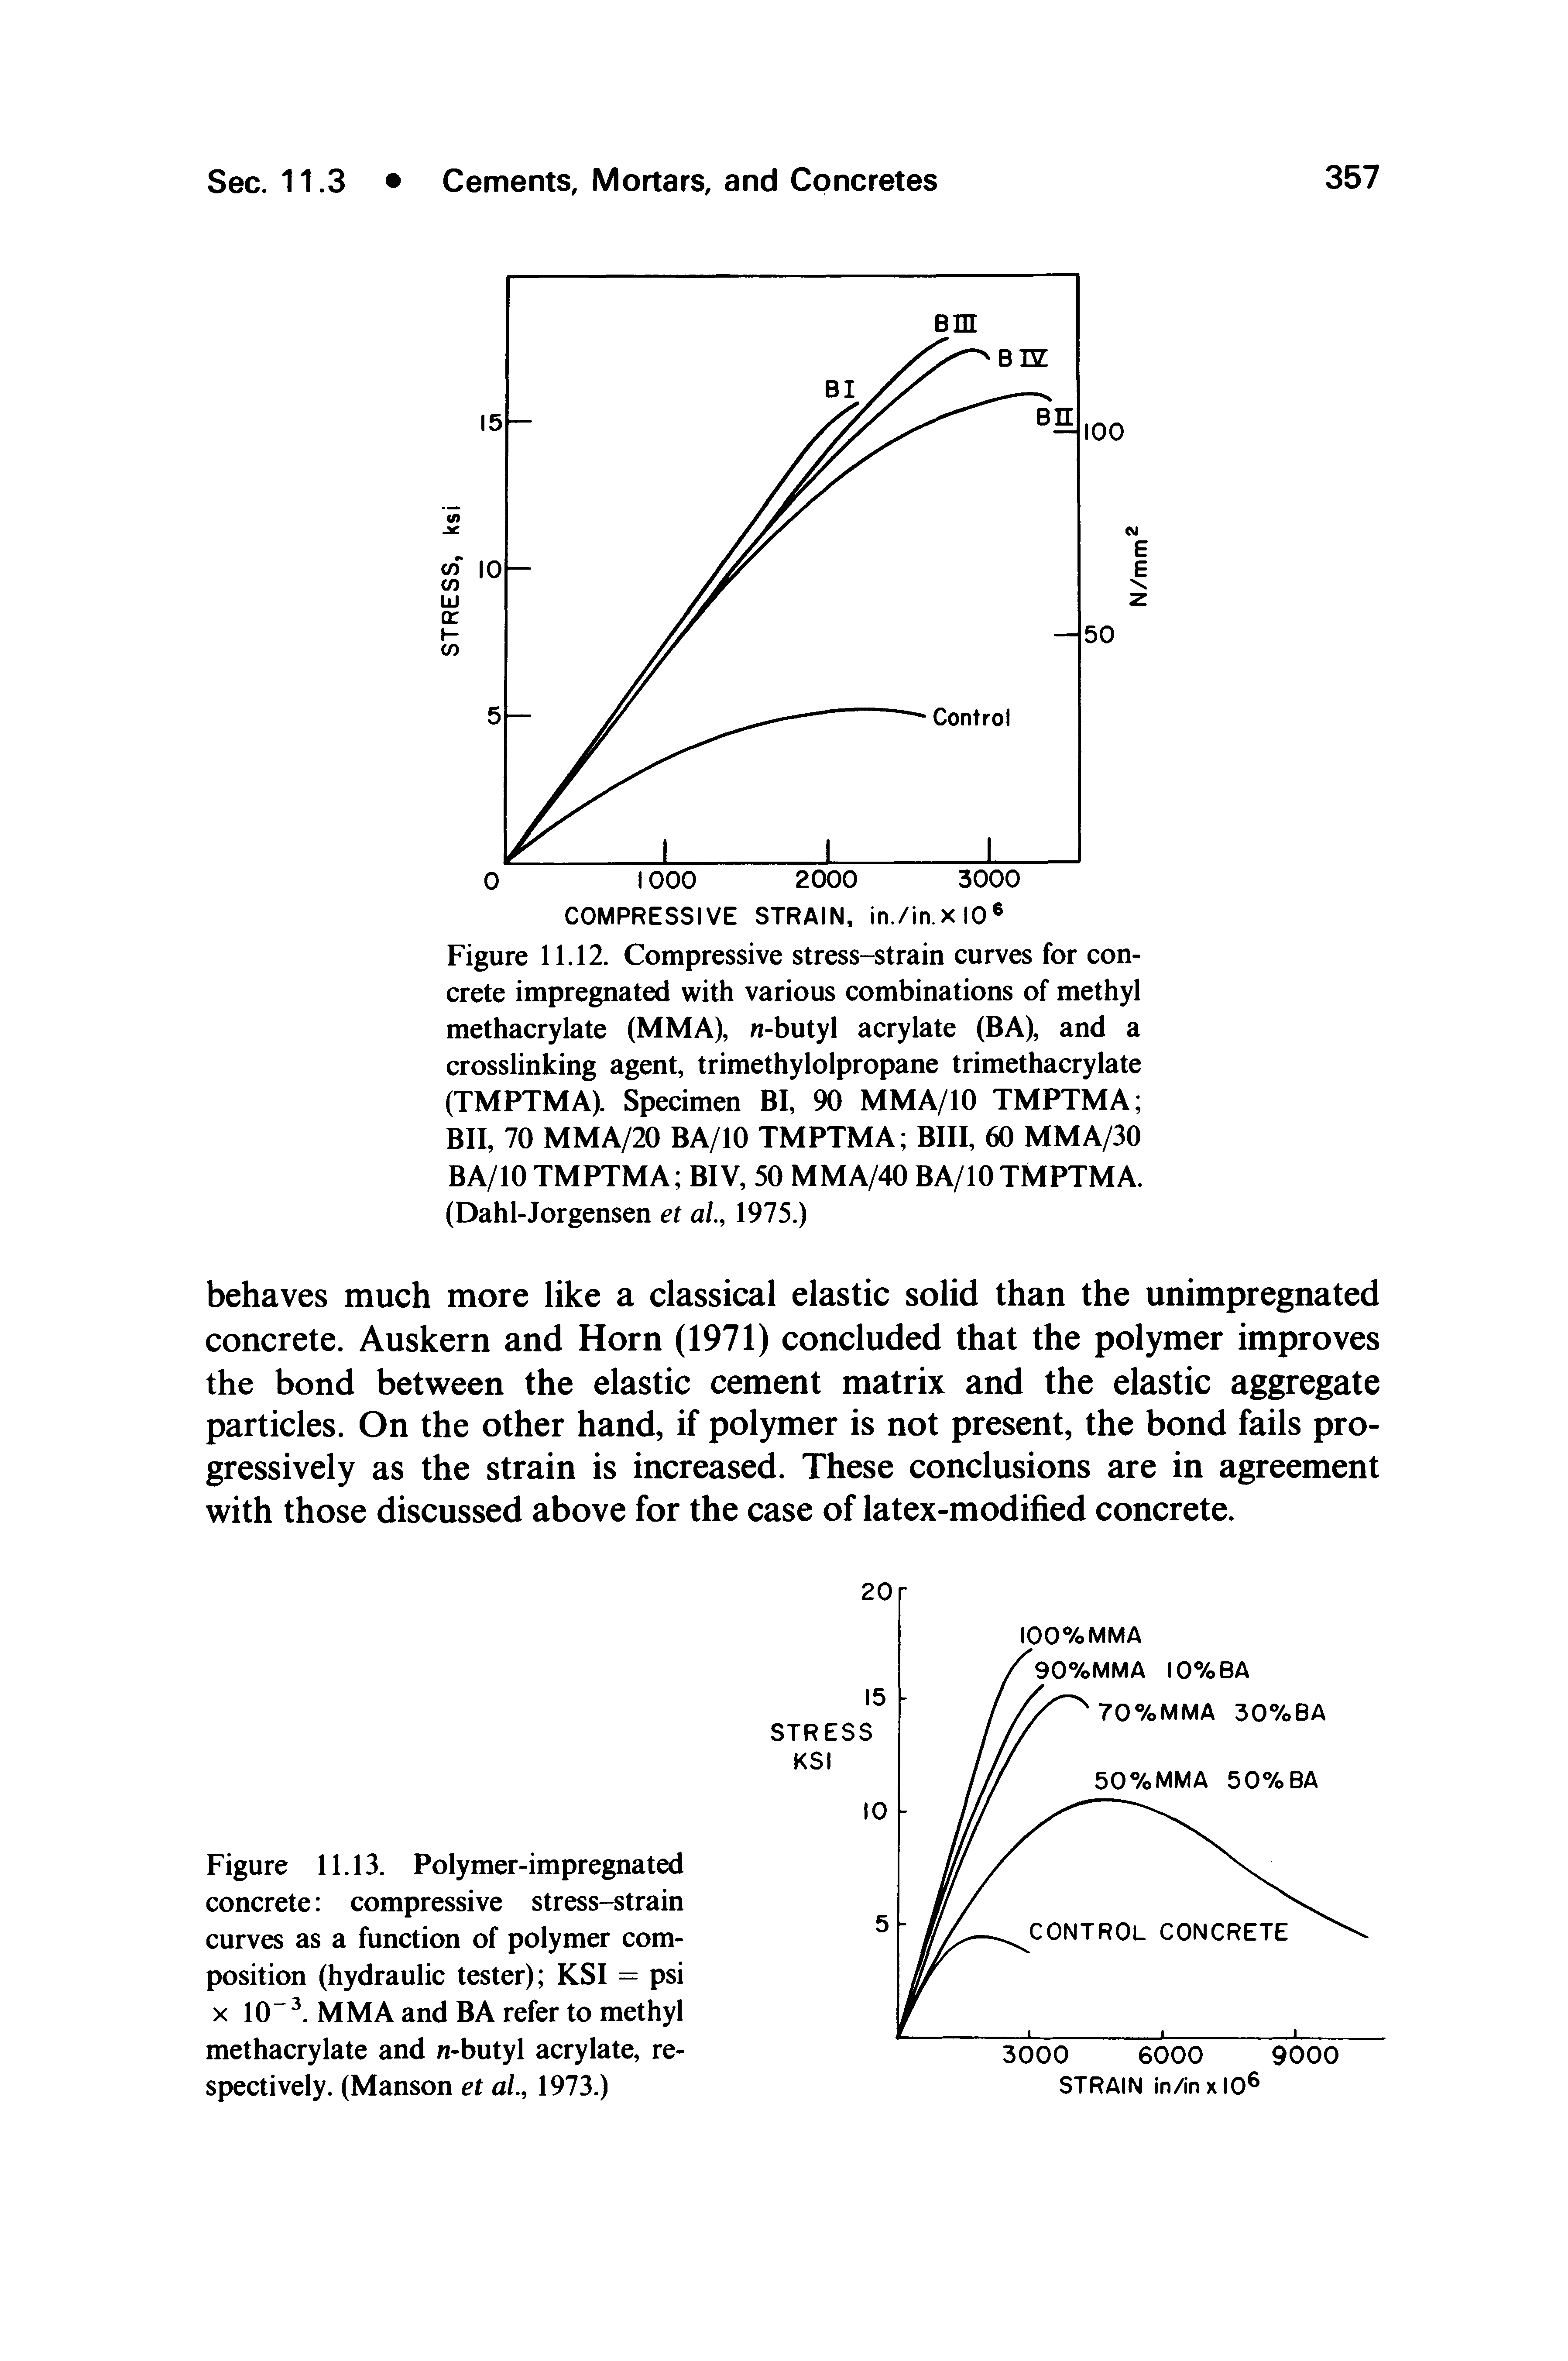 Figure 11.13. Polymer-impregnated concrete compressive stress-strain curves as a function of polymer composition (hydraulic tester) KSI = psi X 10". MMA and BA refer to methyl methacrylate and n-butyl acrylate, respectively. (Manson et al, 1973.)...